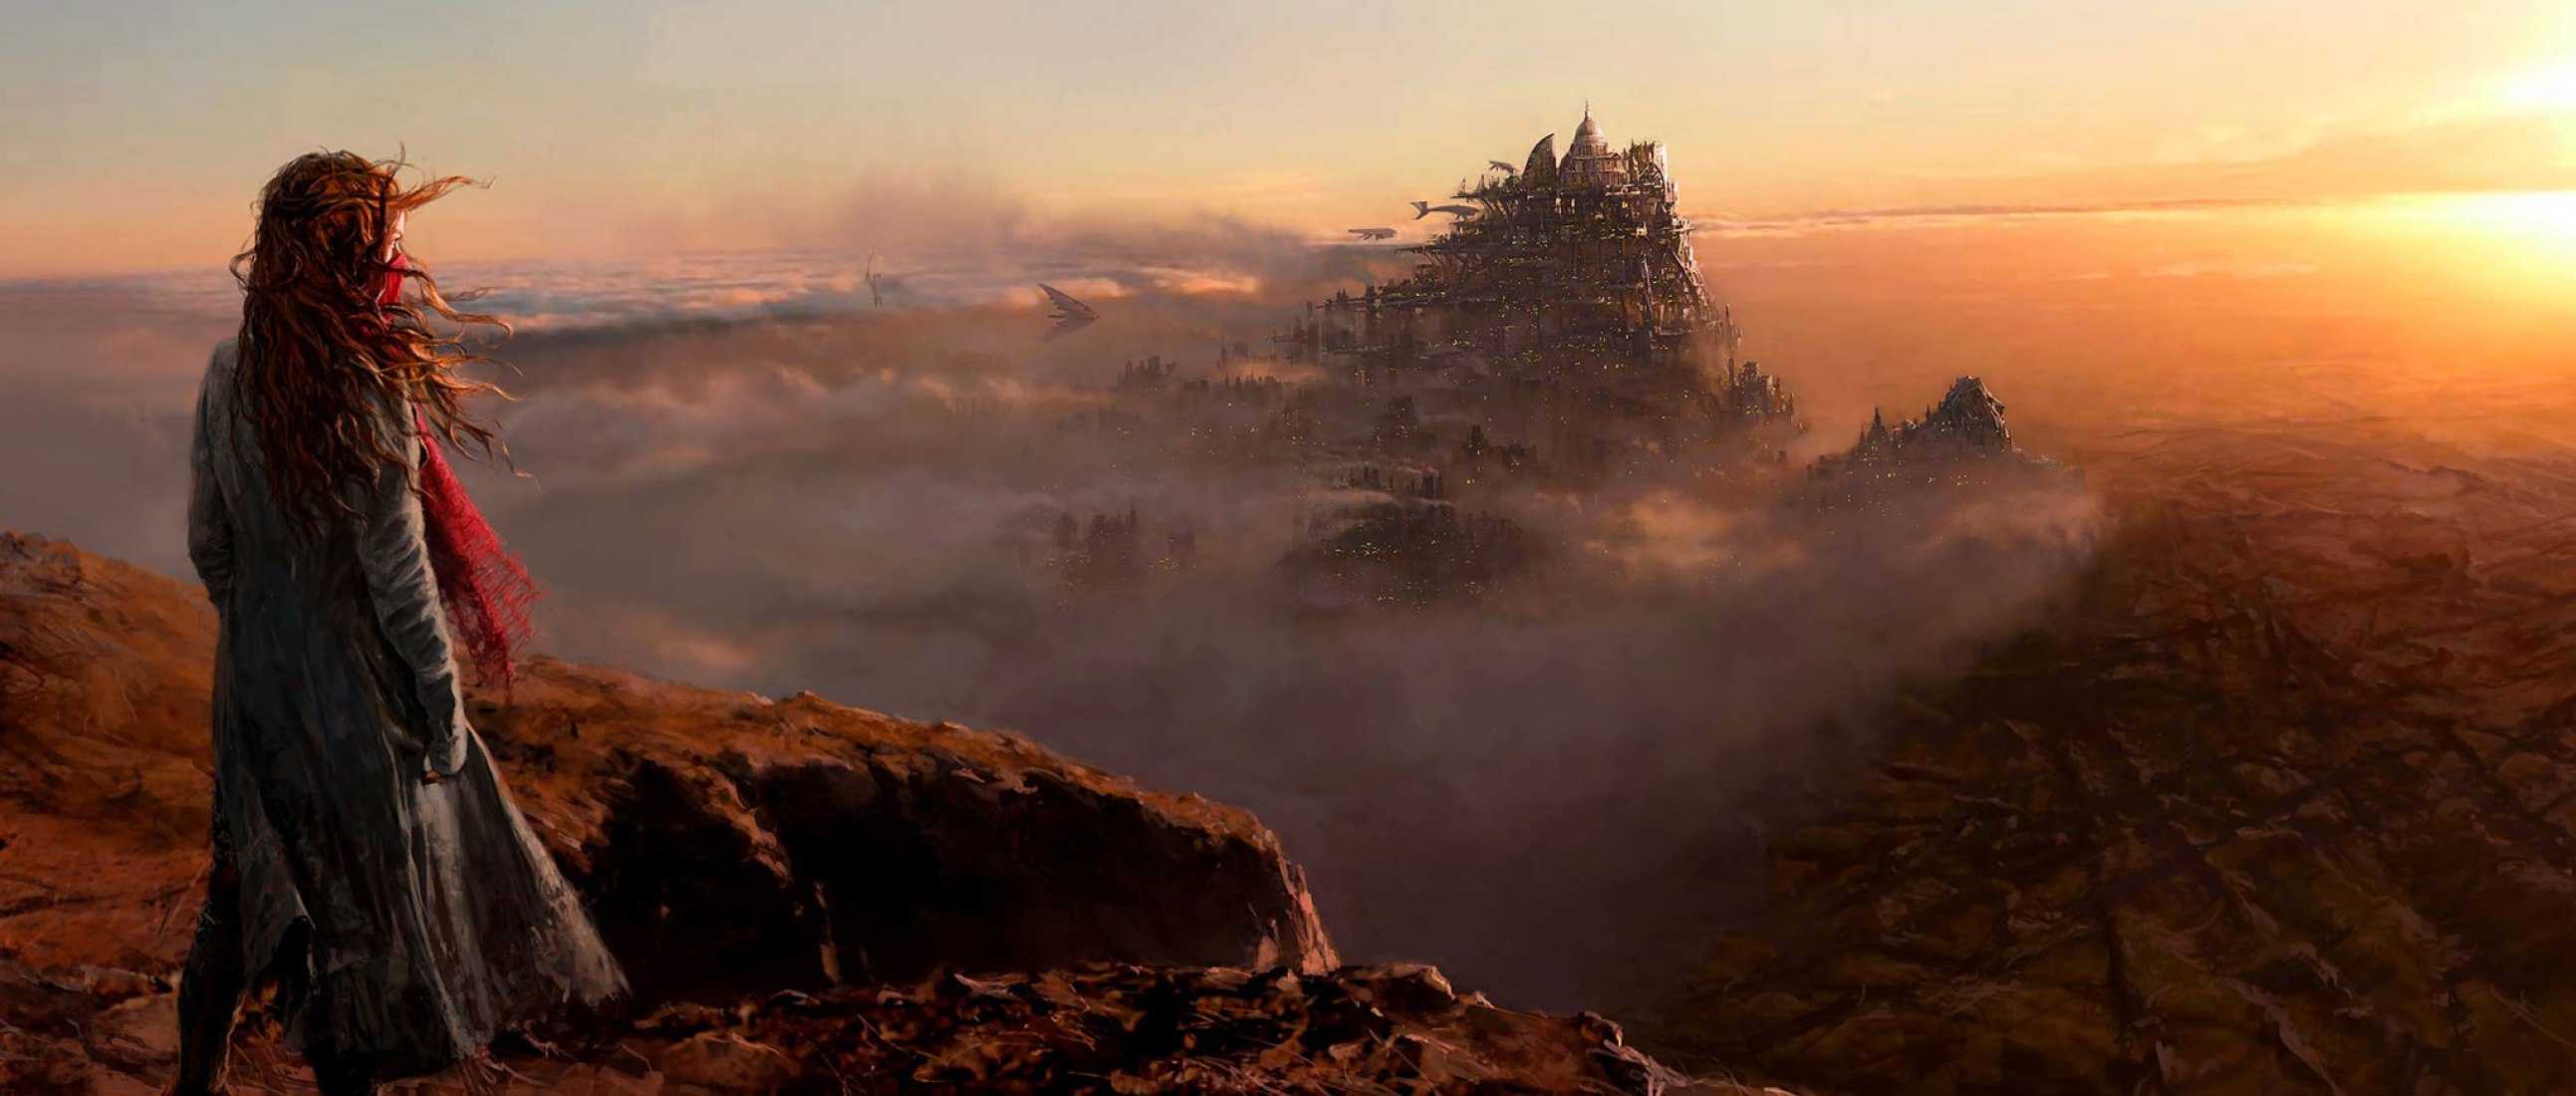 Frames from the movie Mortal Engines 2018